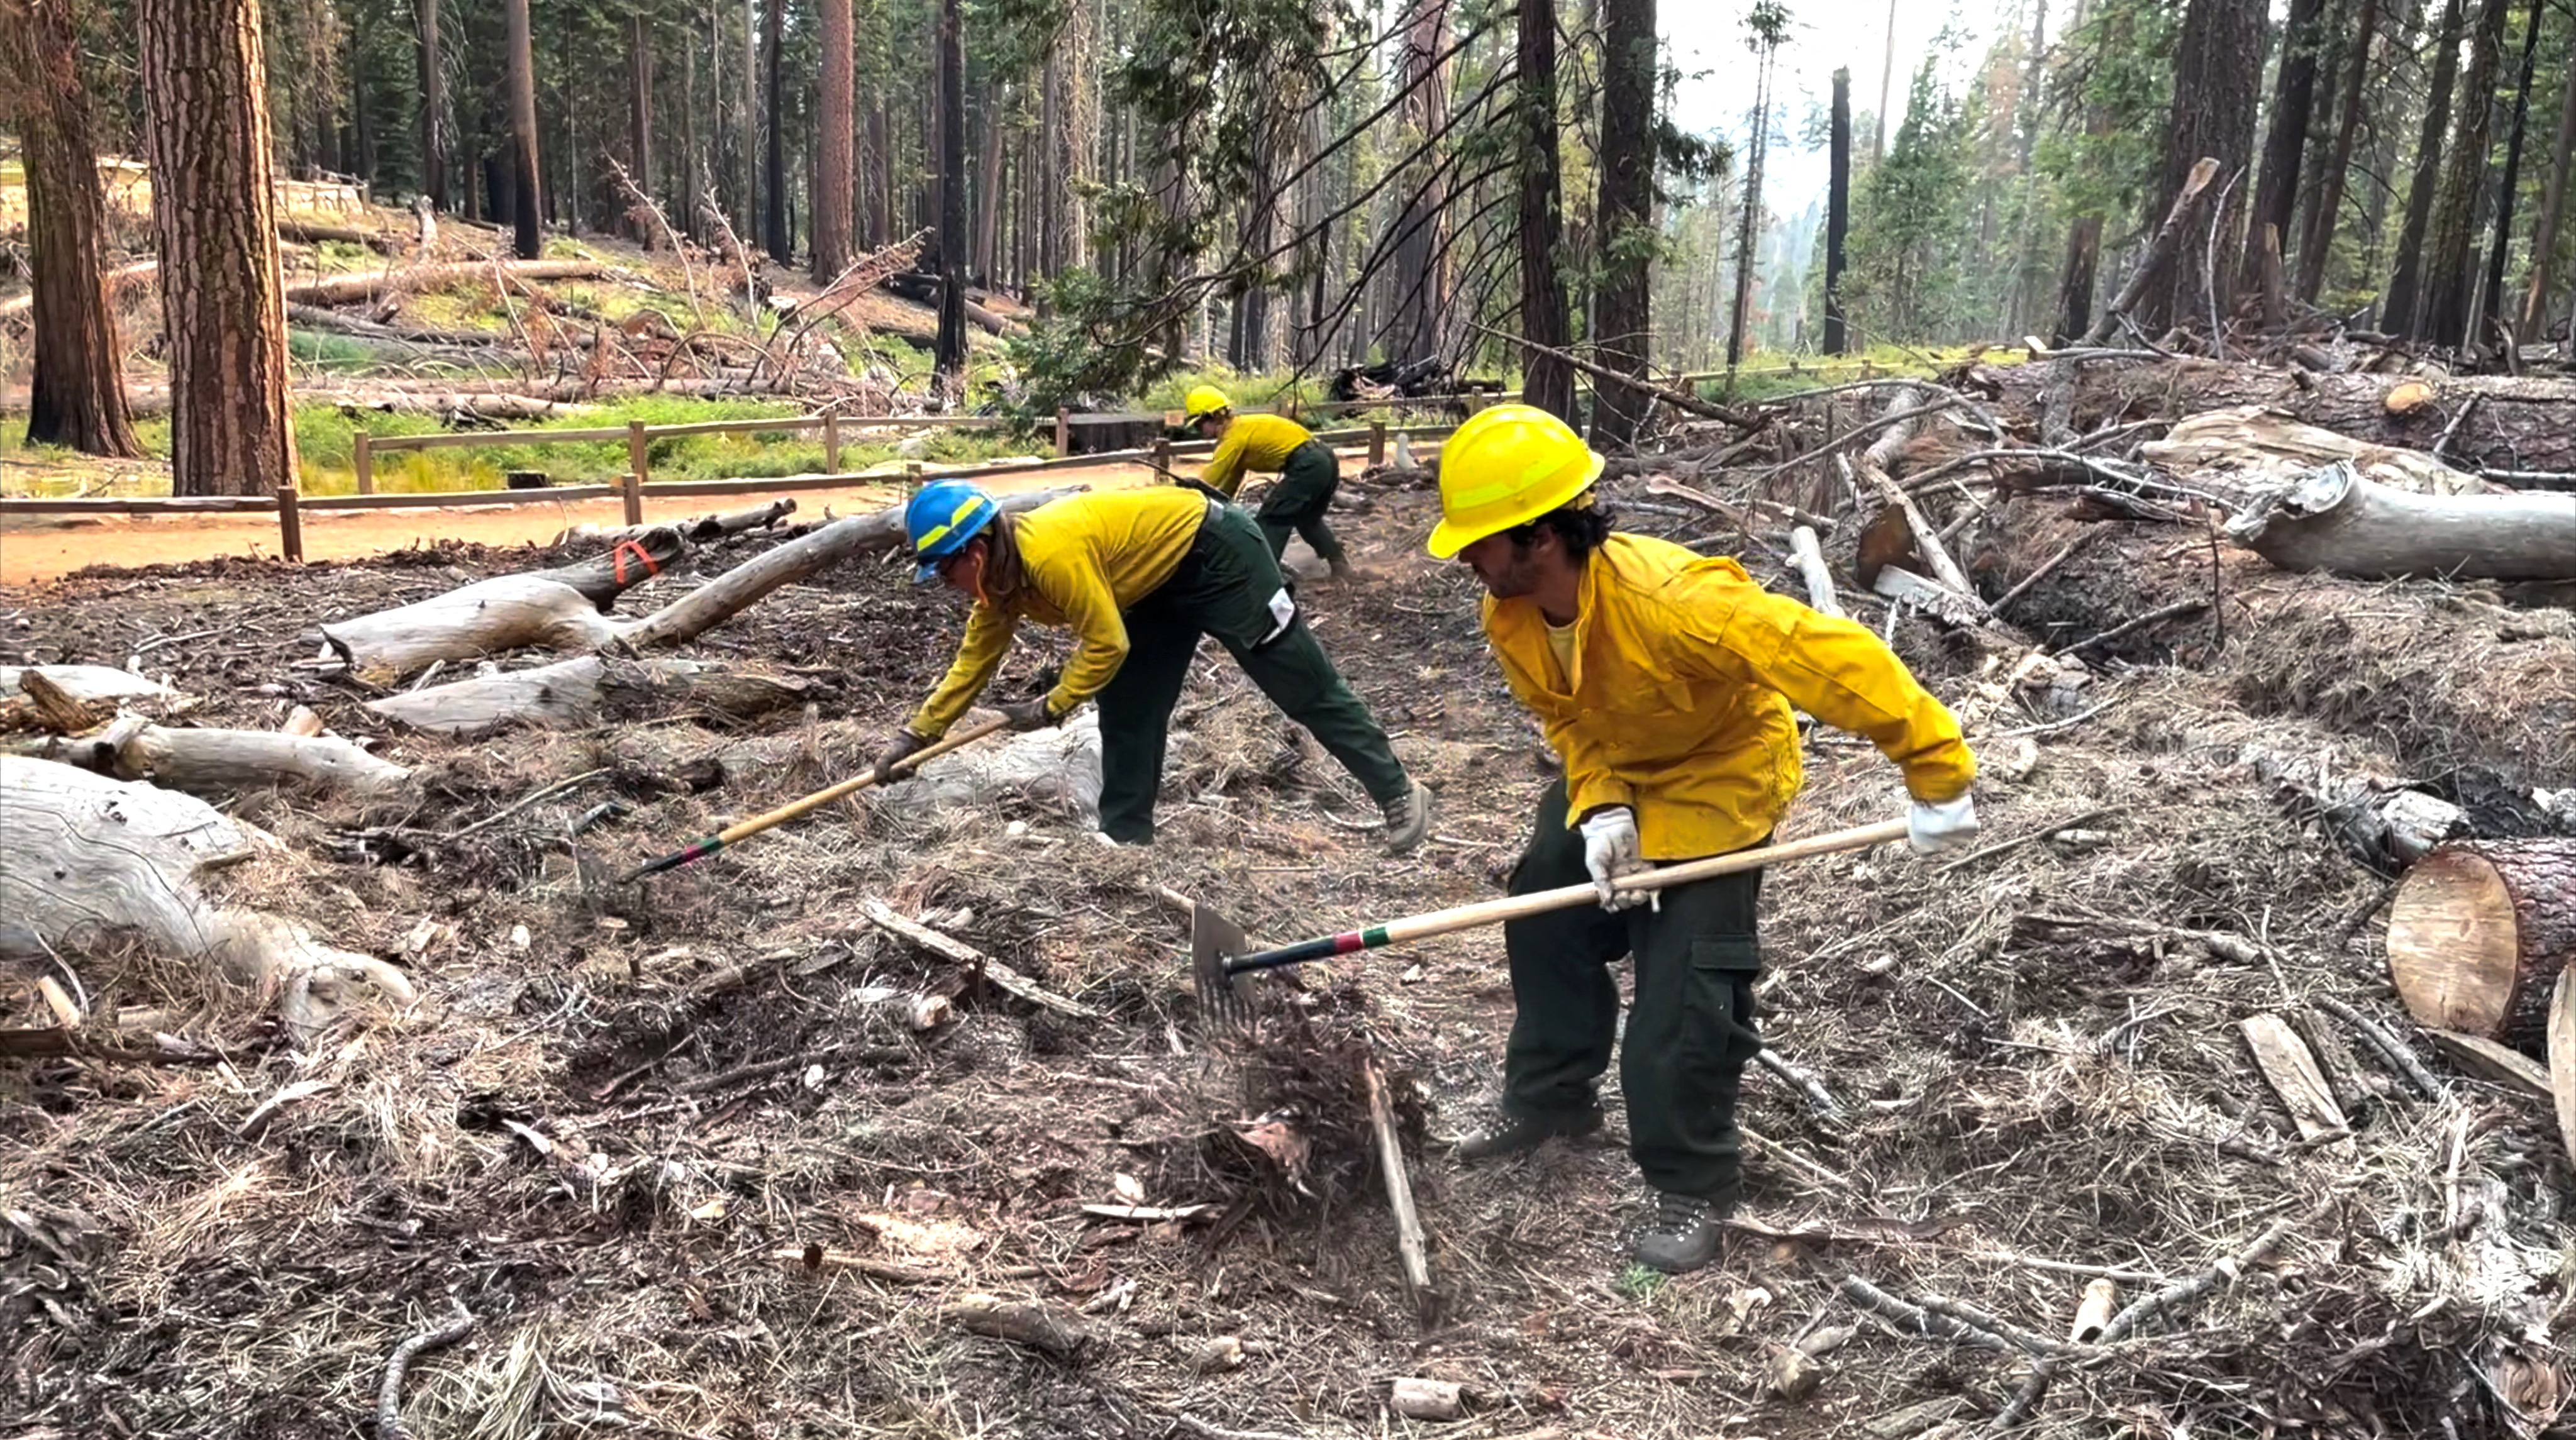 Workers prepare the area to protect it, as Washburn Fire continues to burn in the area, in Yosemite National Park's Mariposa Grove